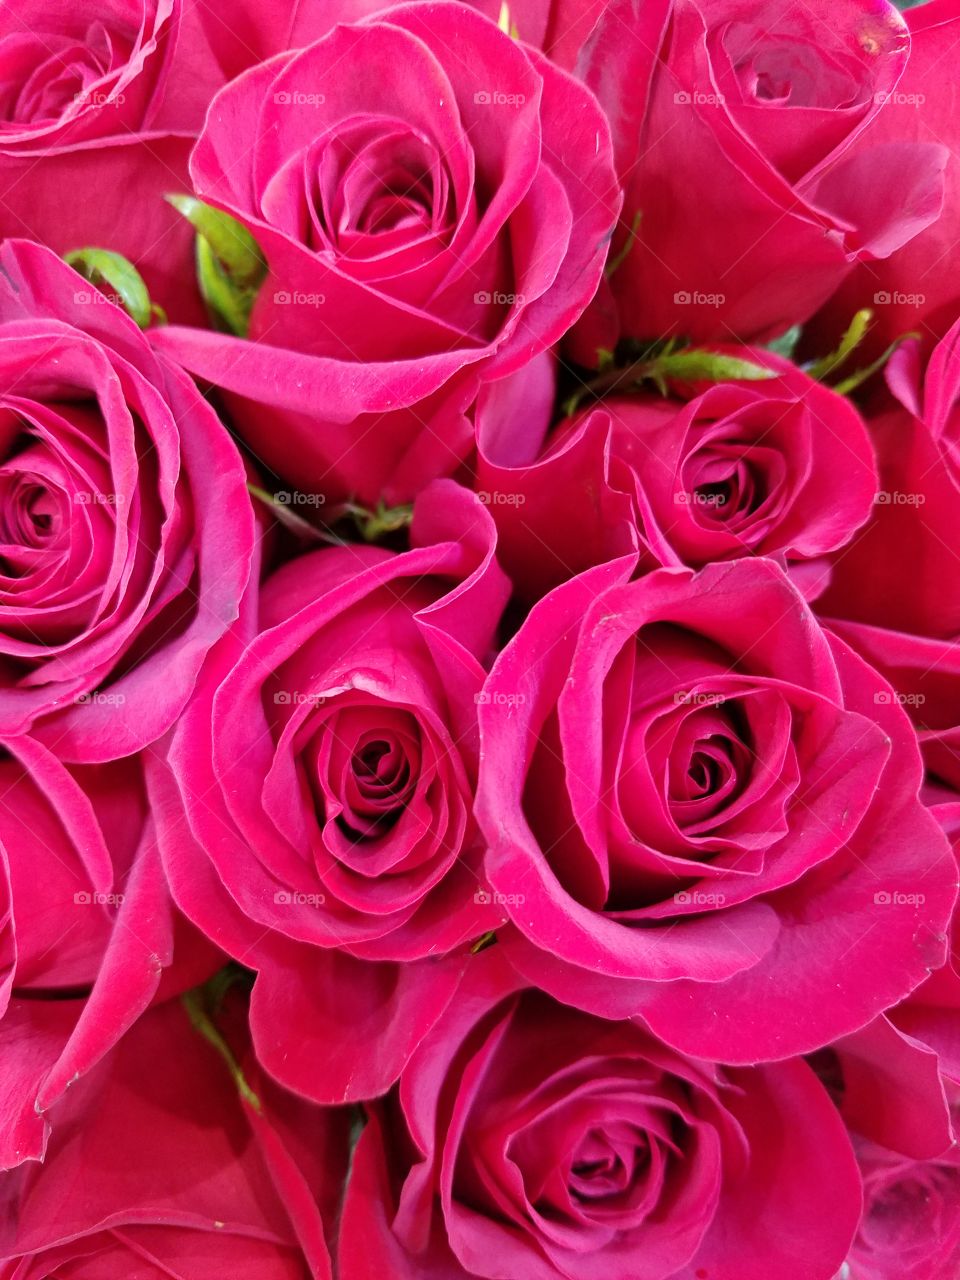 Bouquet of roses!